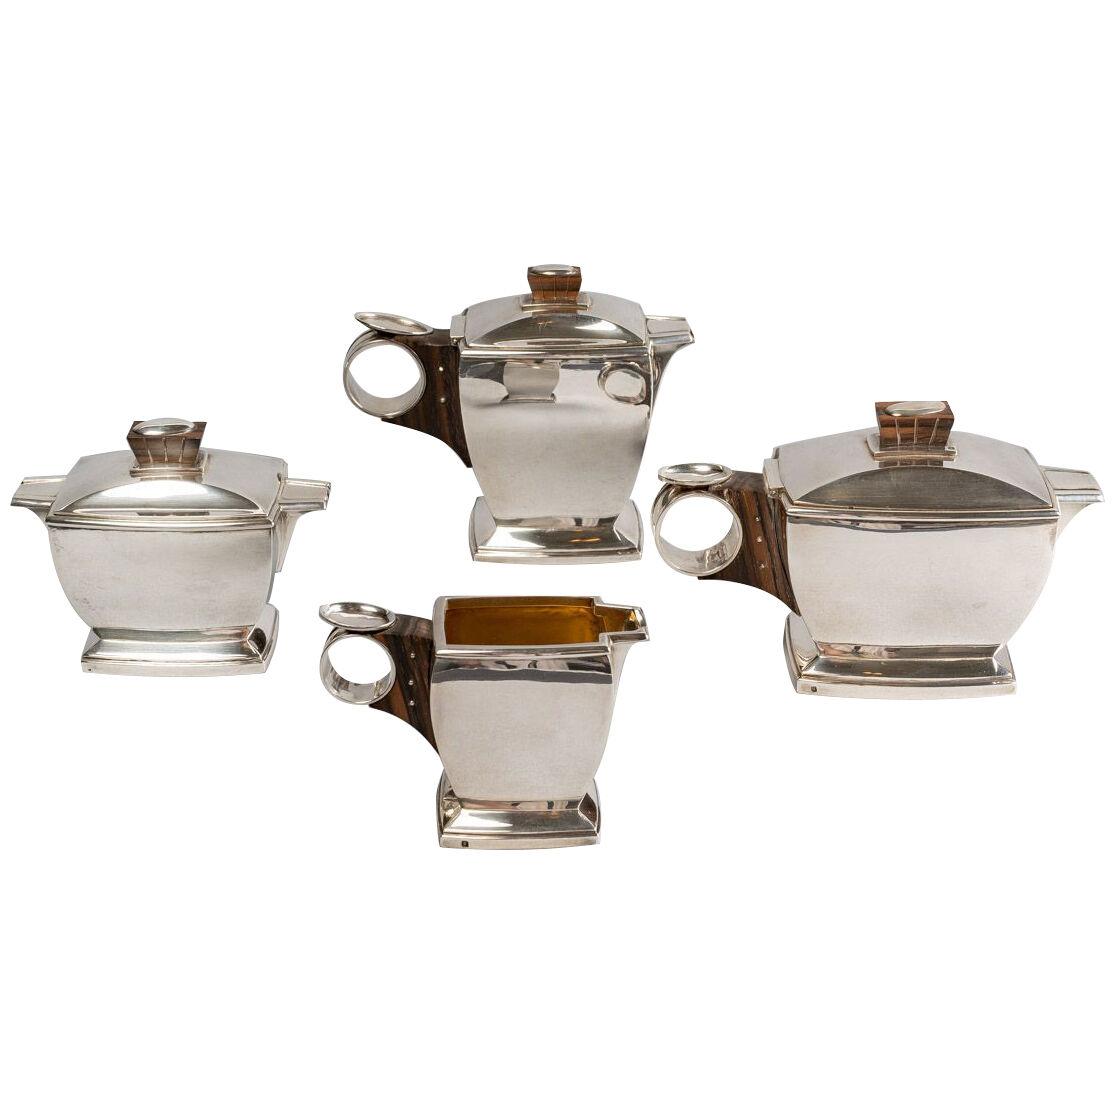 1920 Boin Taburet - Tea And Coffee Egoiste Set In Sterling Silver And Macassar